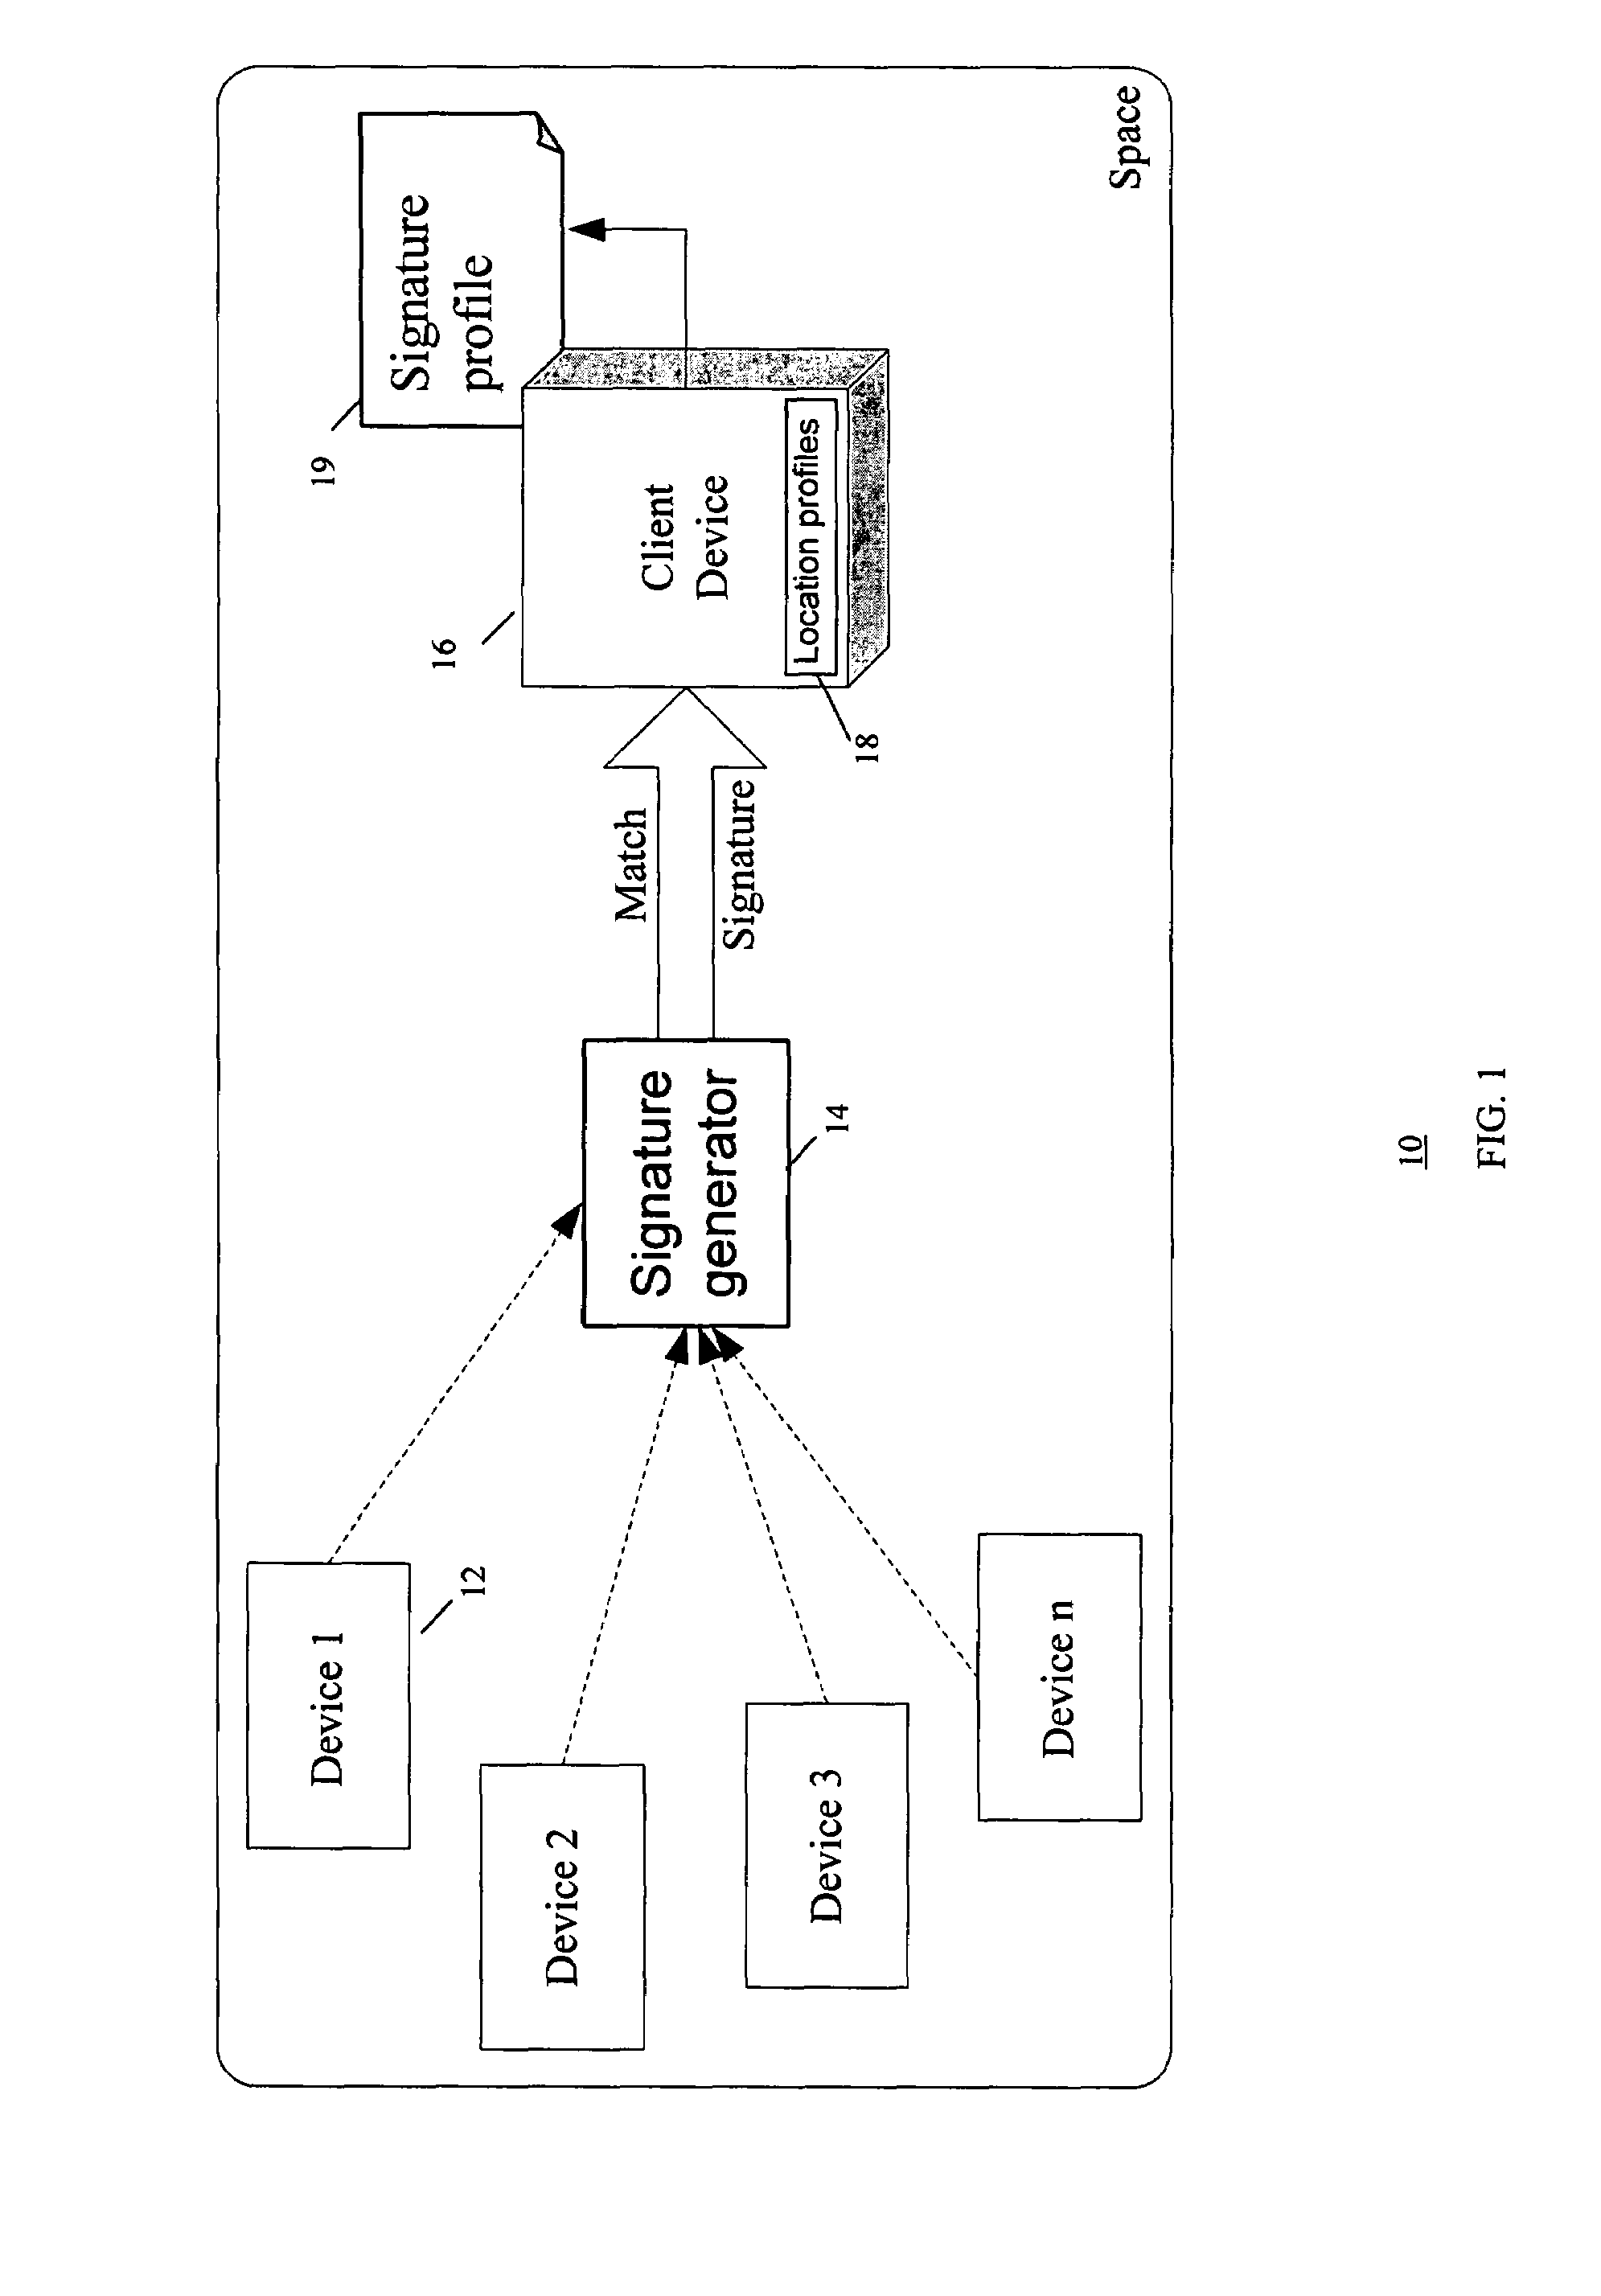 Method and system for location identification